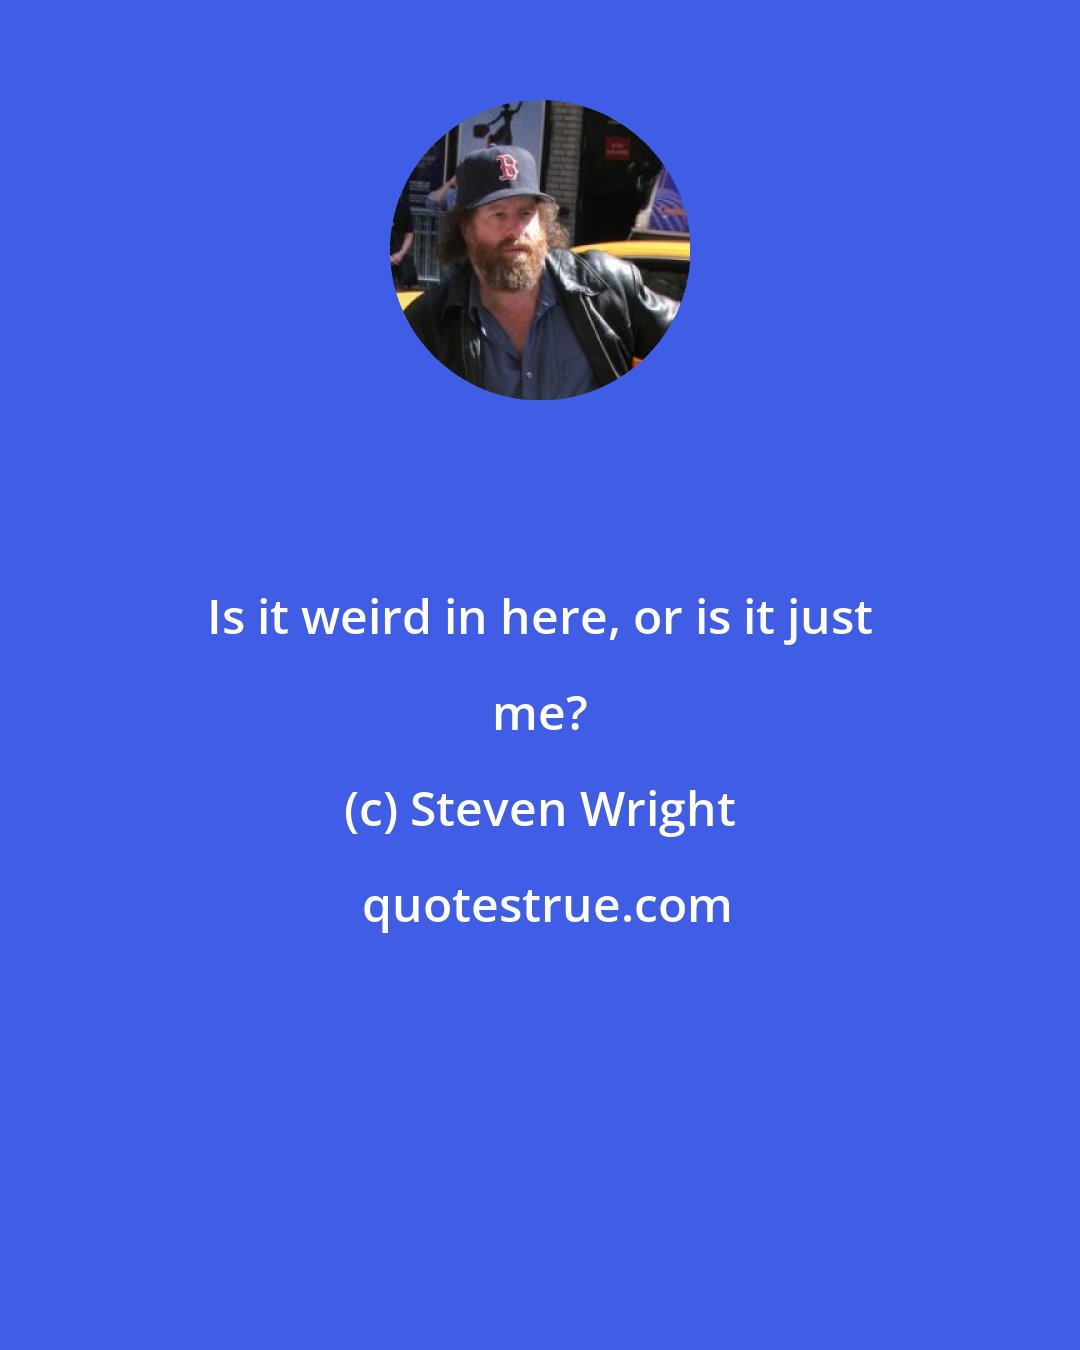 Steven Wright: Is it weird in here, or is it just me?